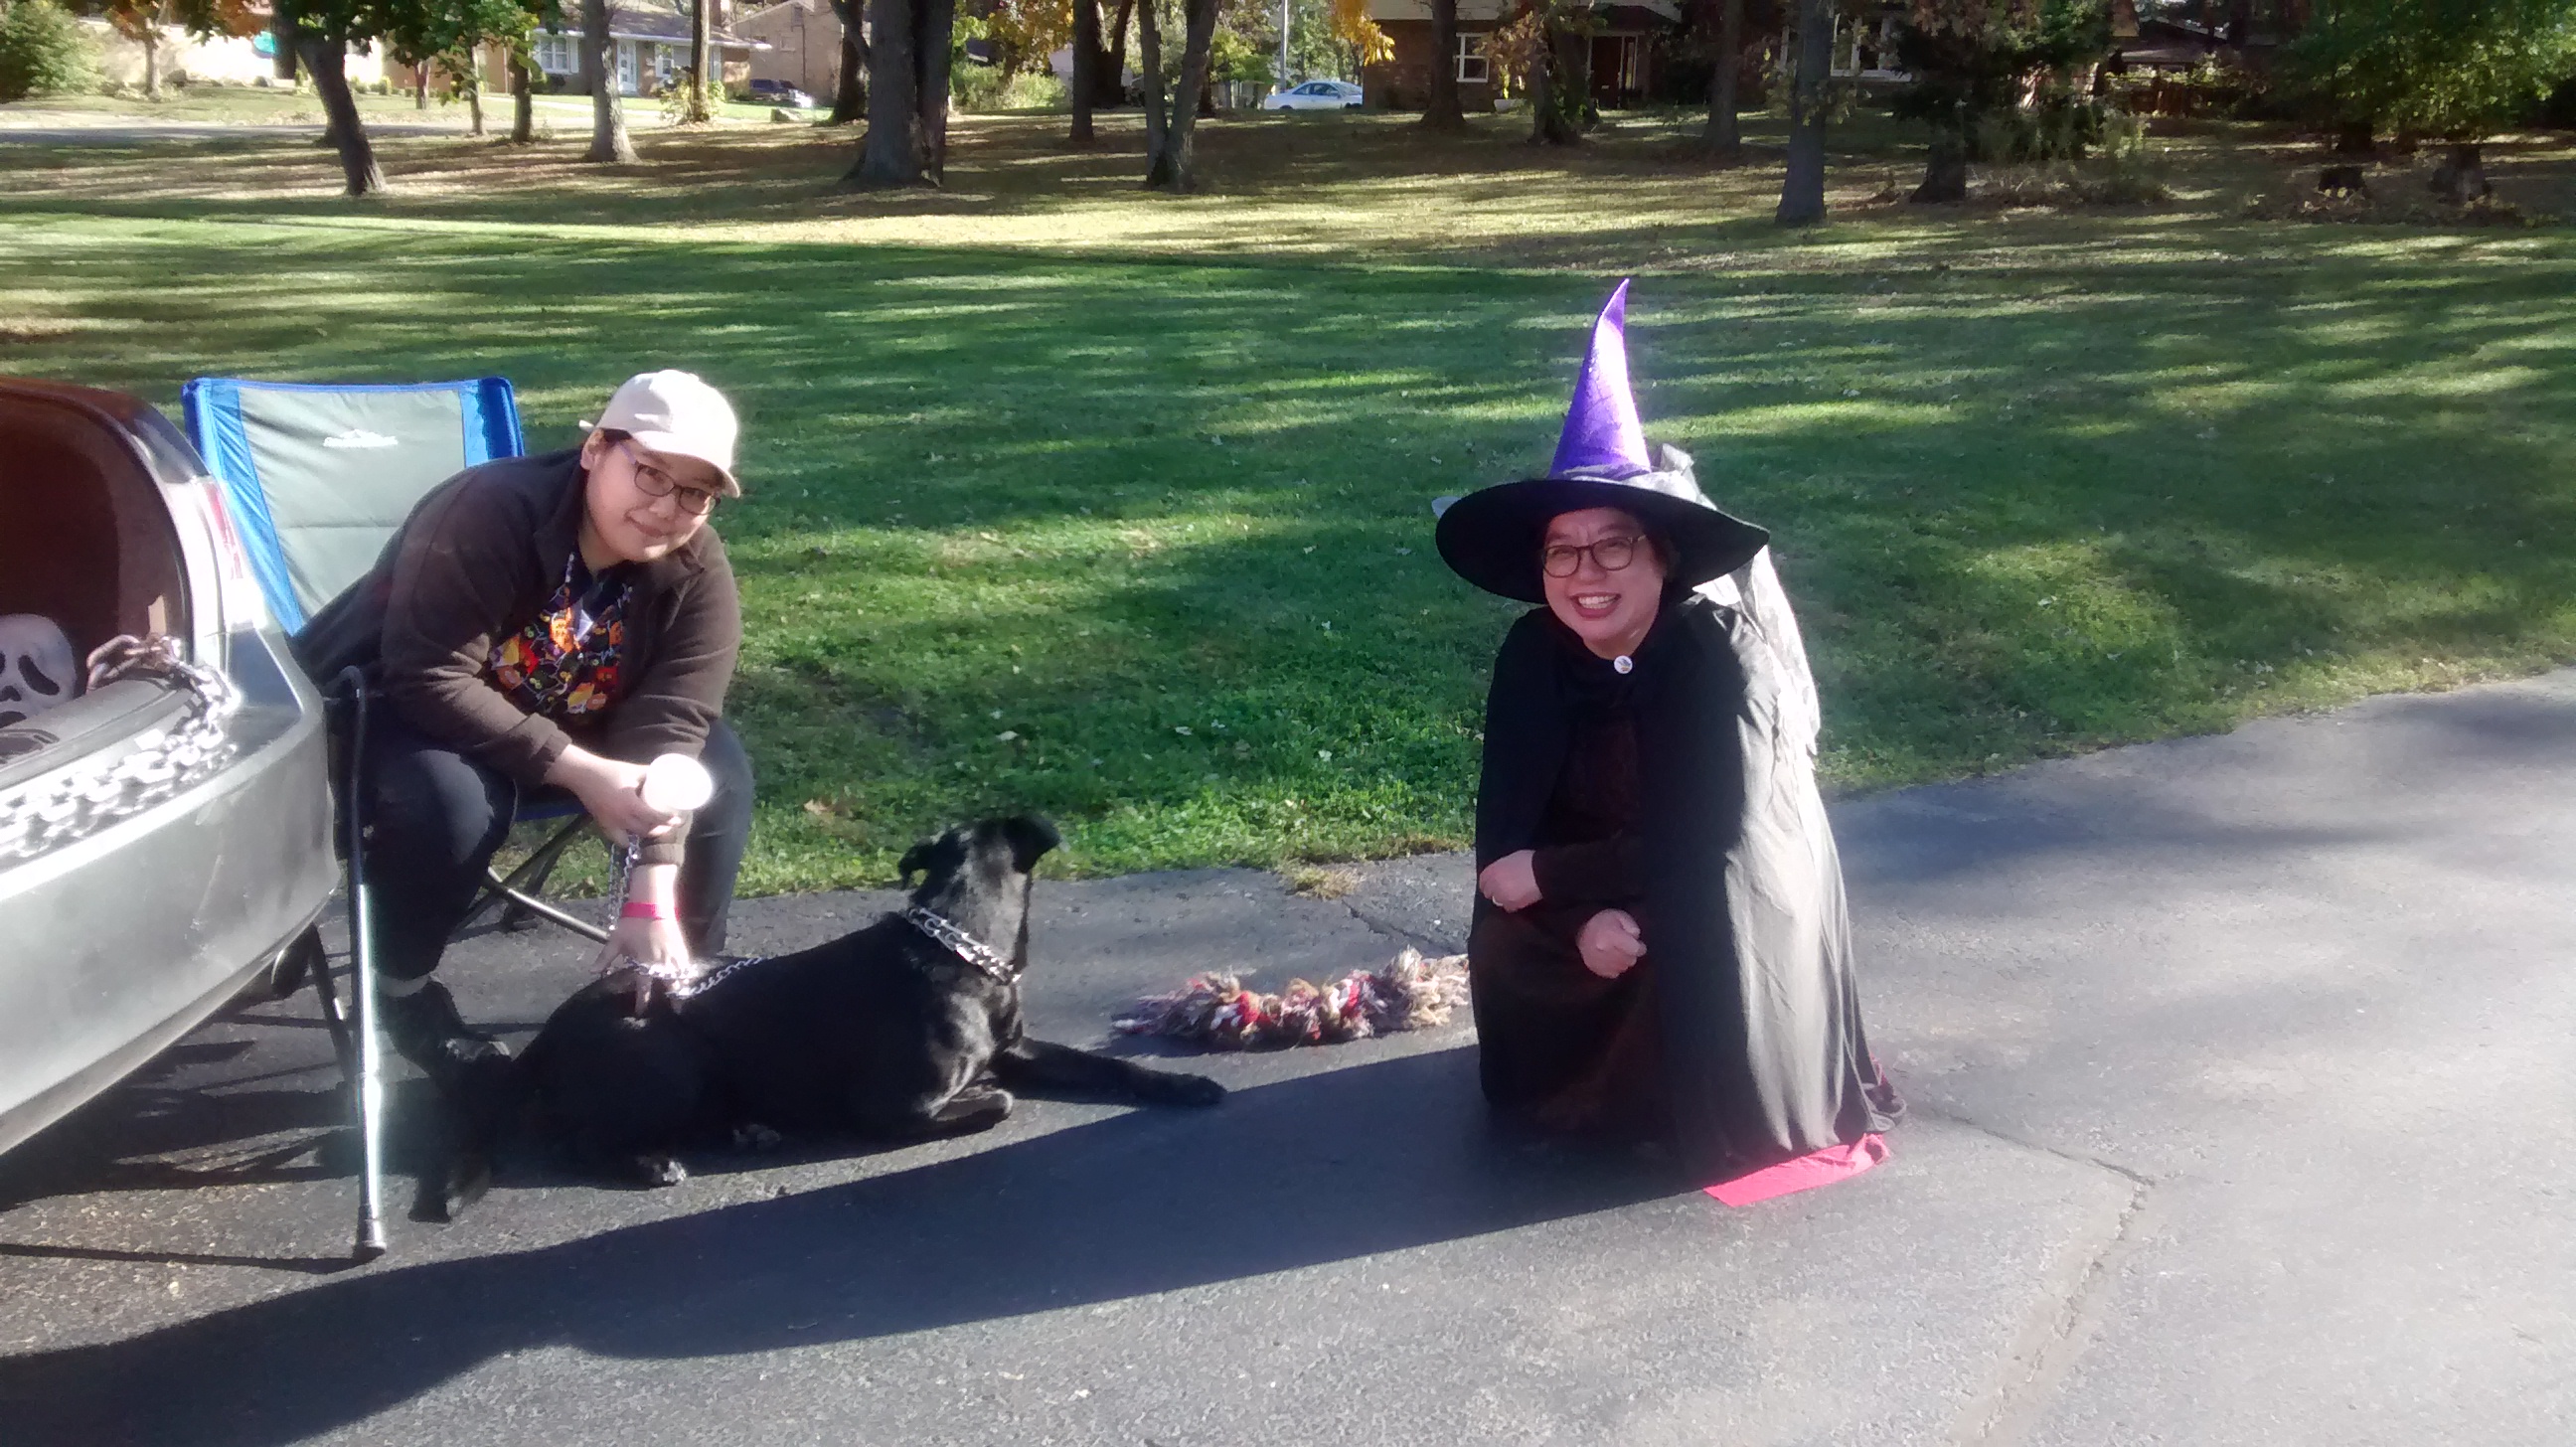 A pastor dressed up as a witch crouching next to a seated person and dog.